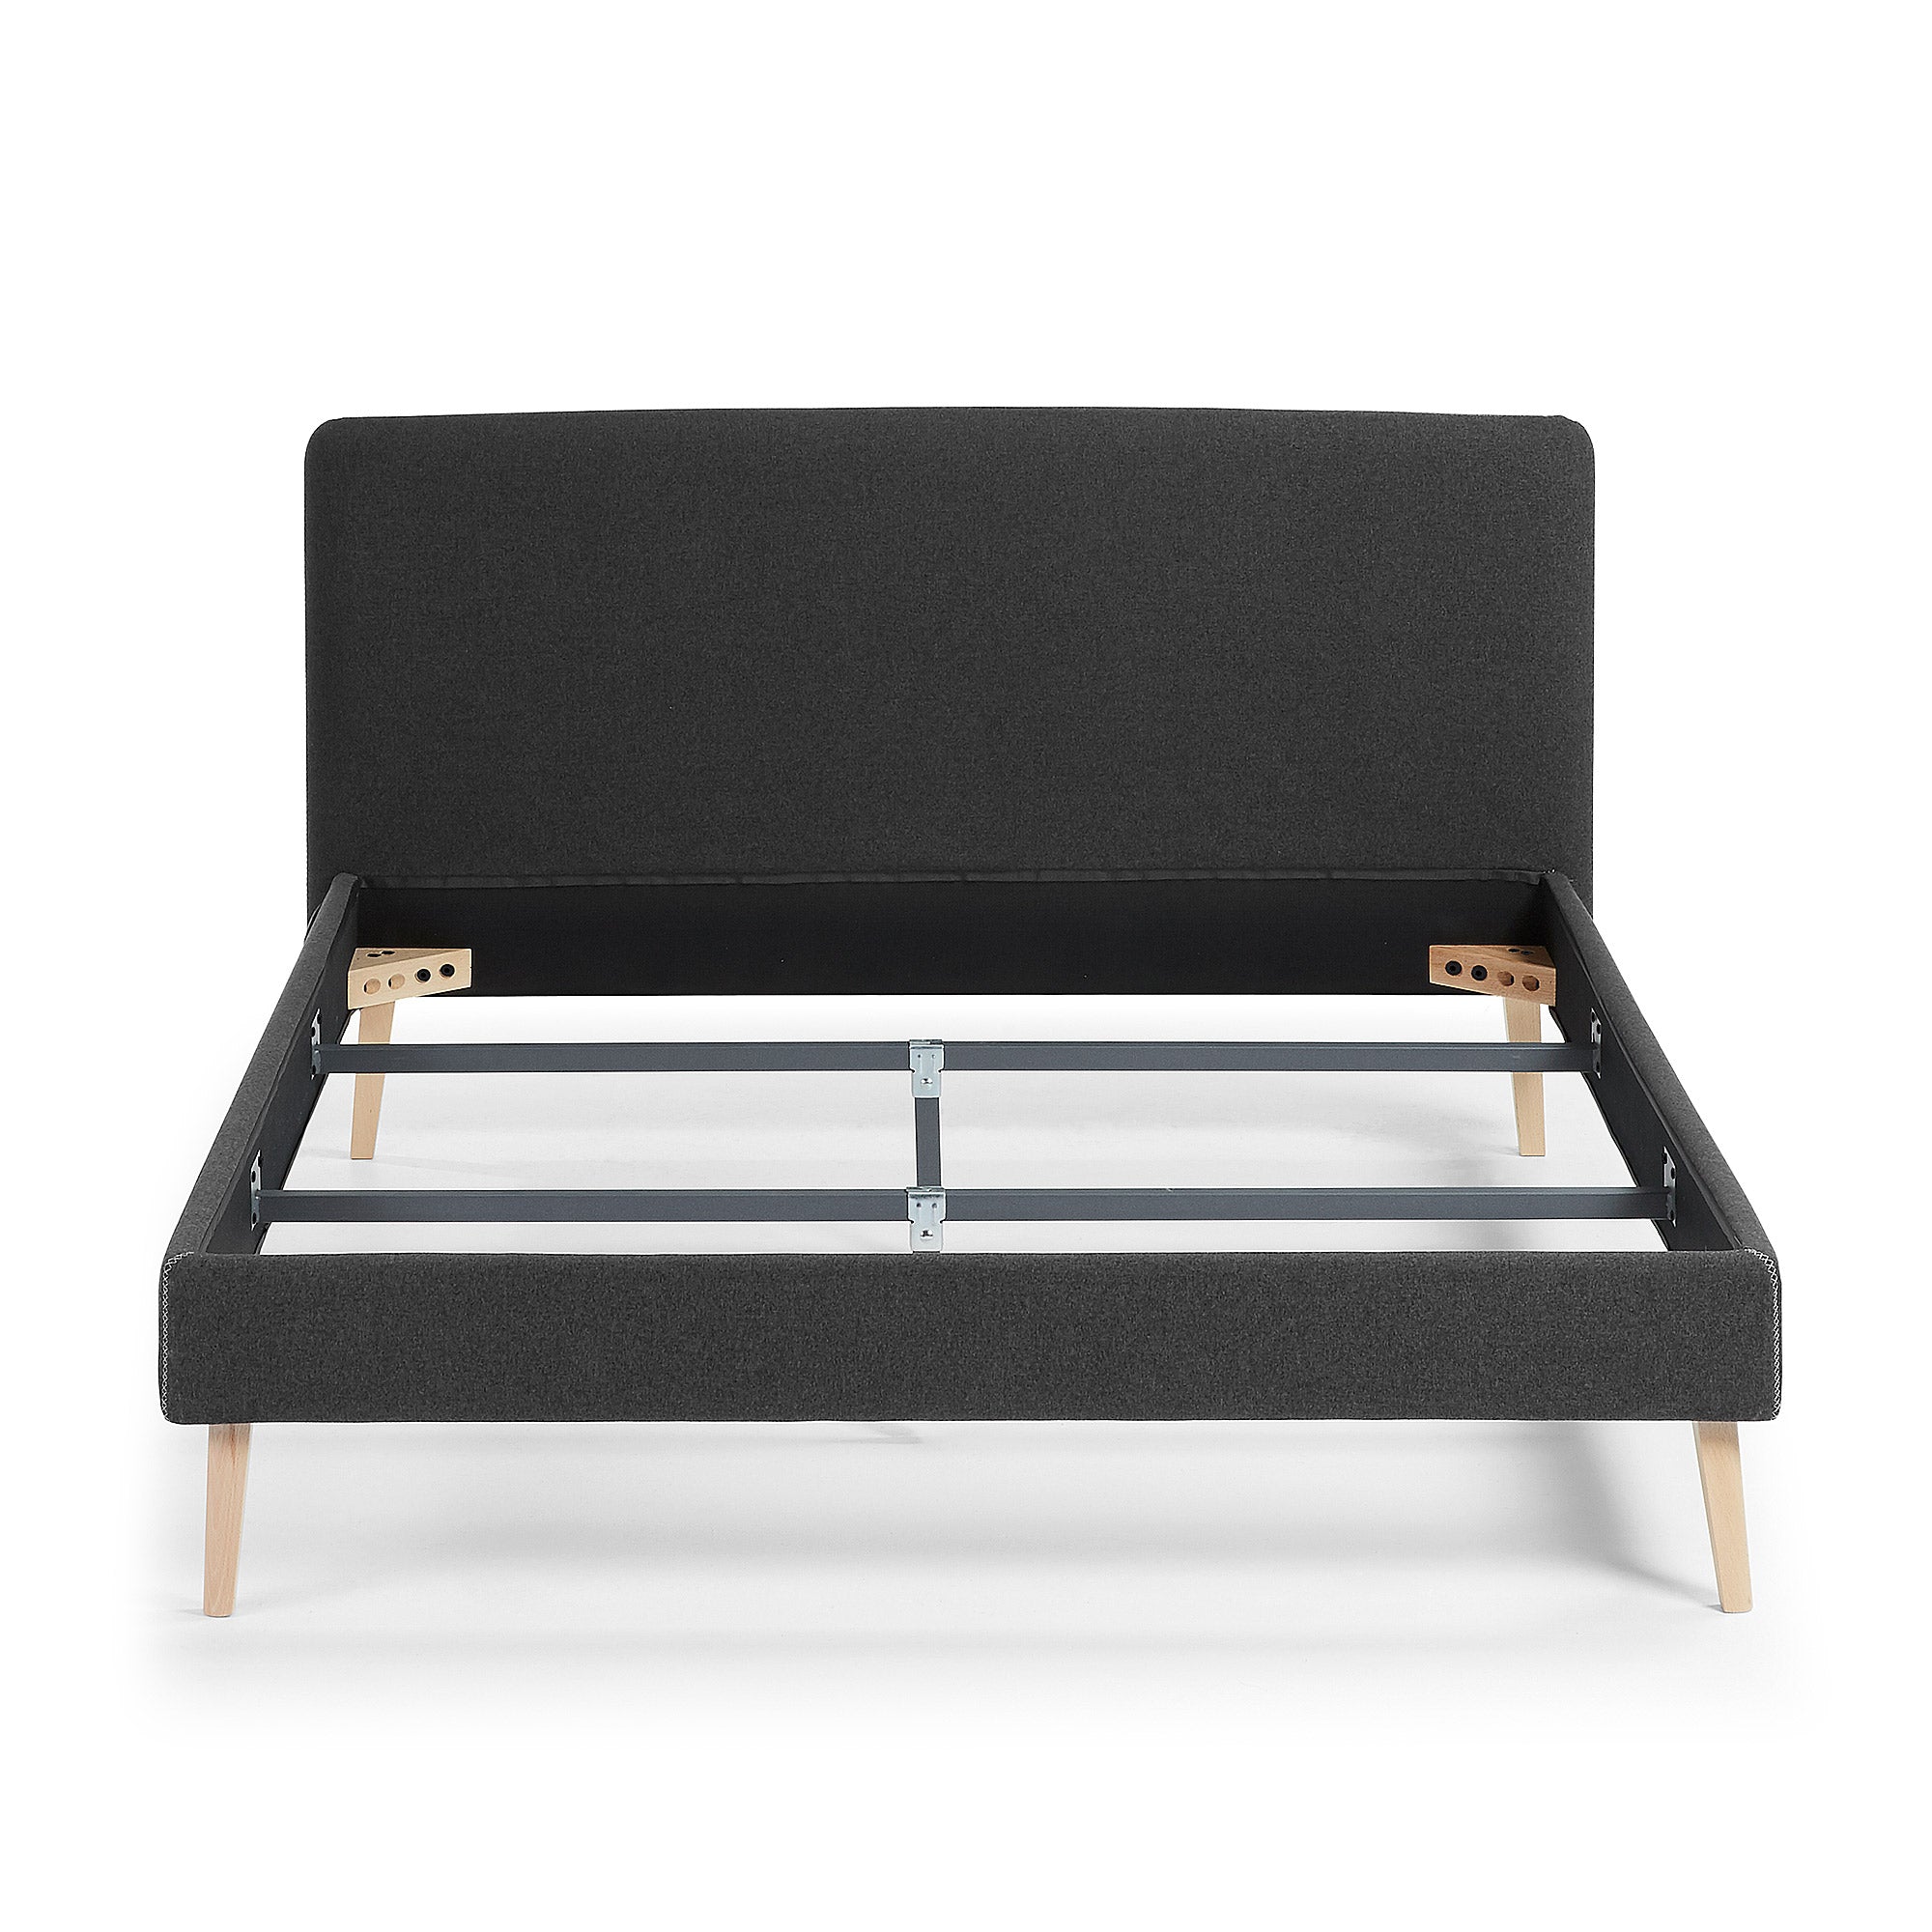 Dyla bed with removable cover in black, with solid beech wood legs for a 150 x 190 cm mattress